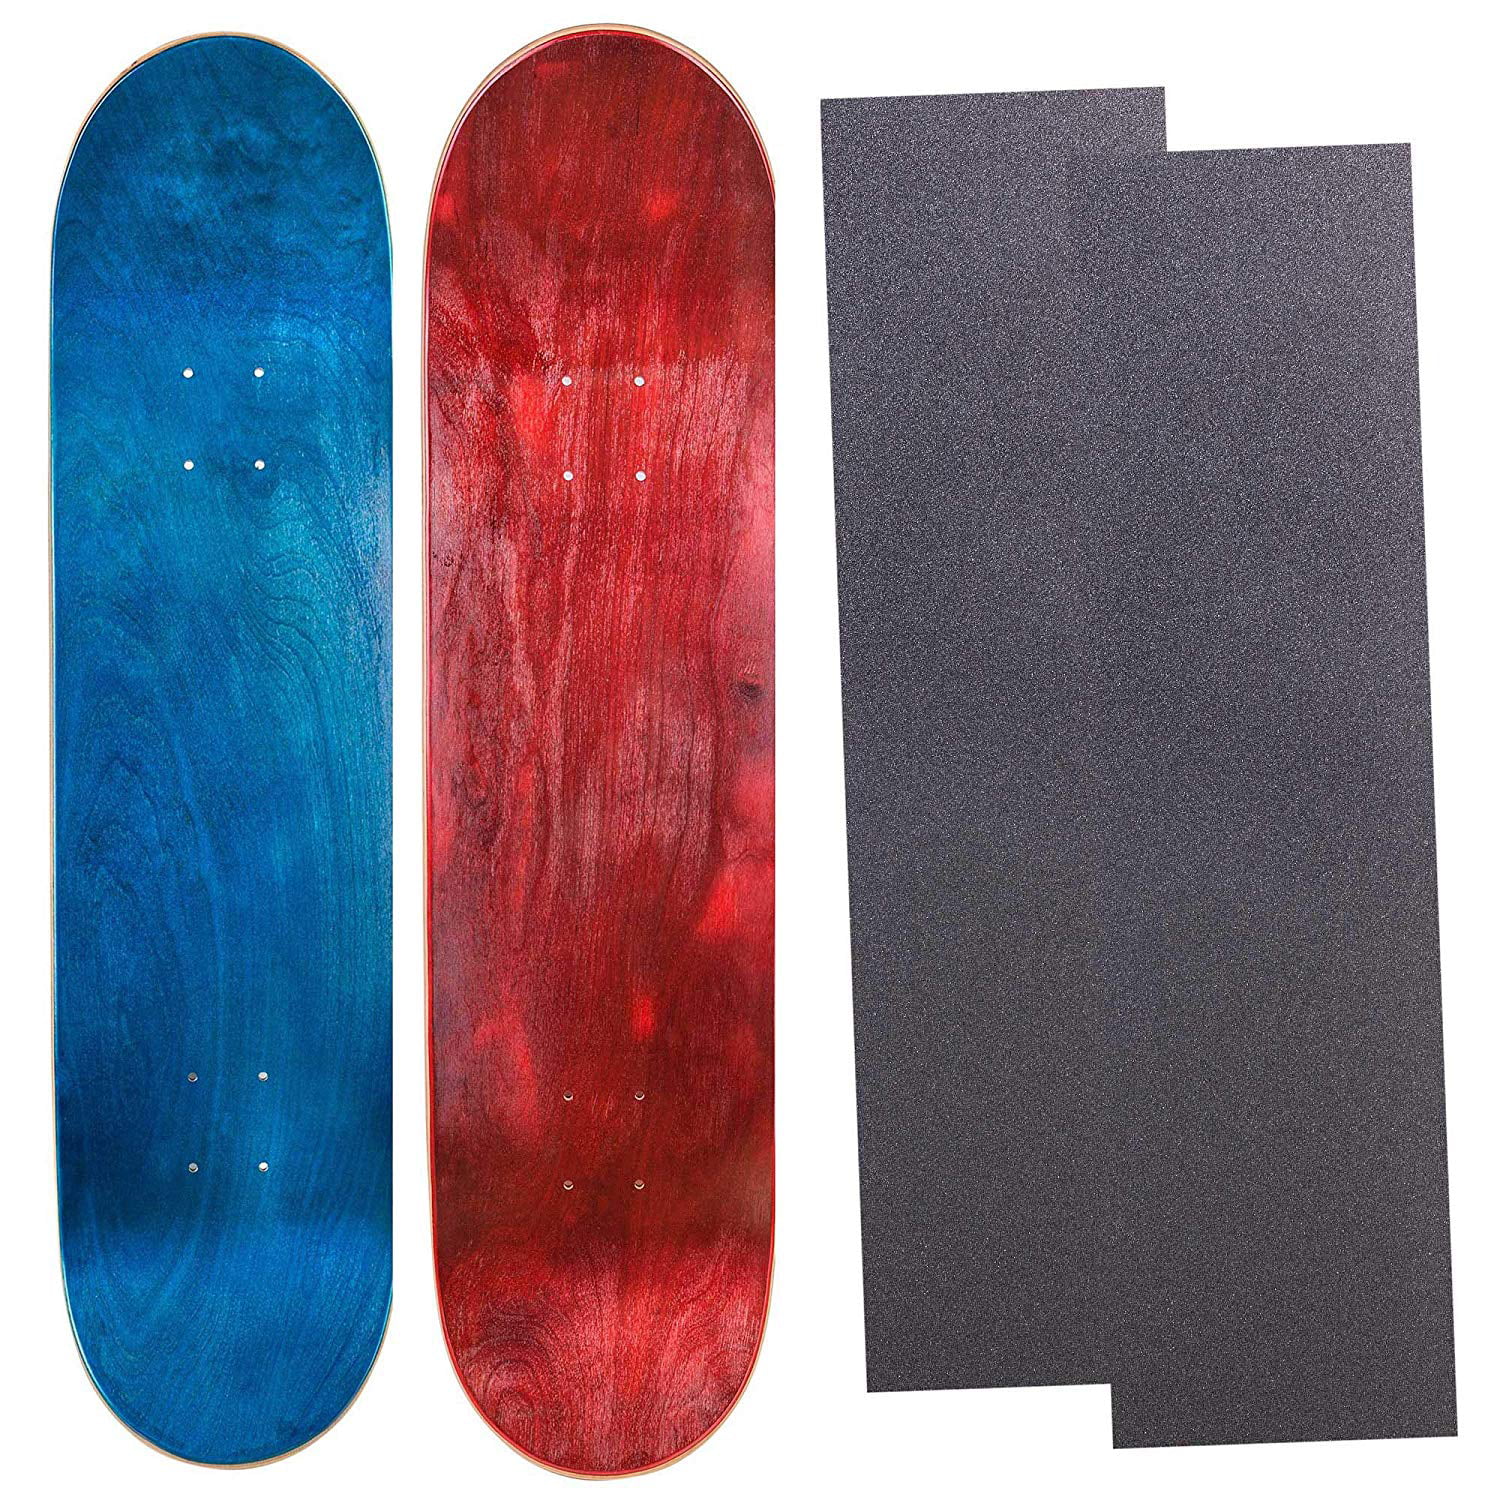 Add-on Wheels and Grip Tape for SKATEBOARD Size 7.75 to 8.25